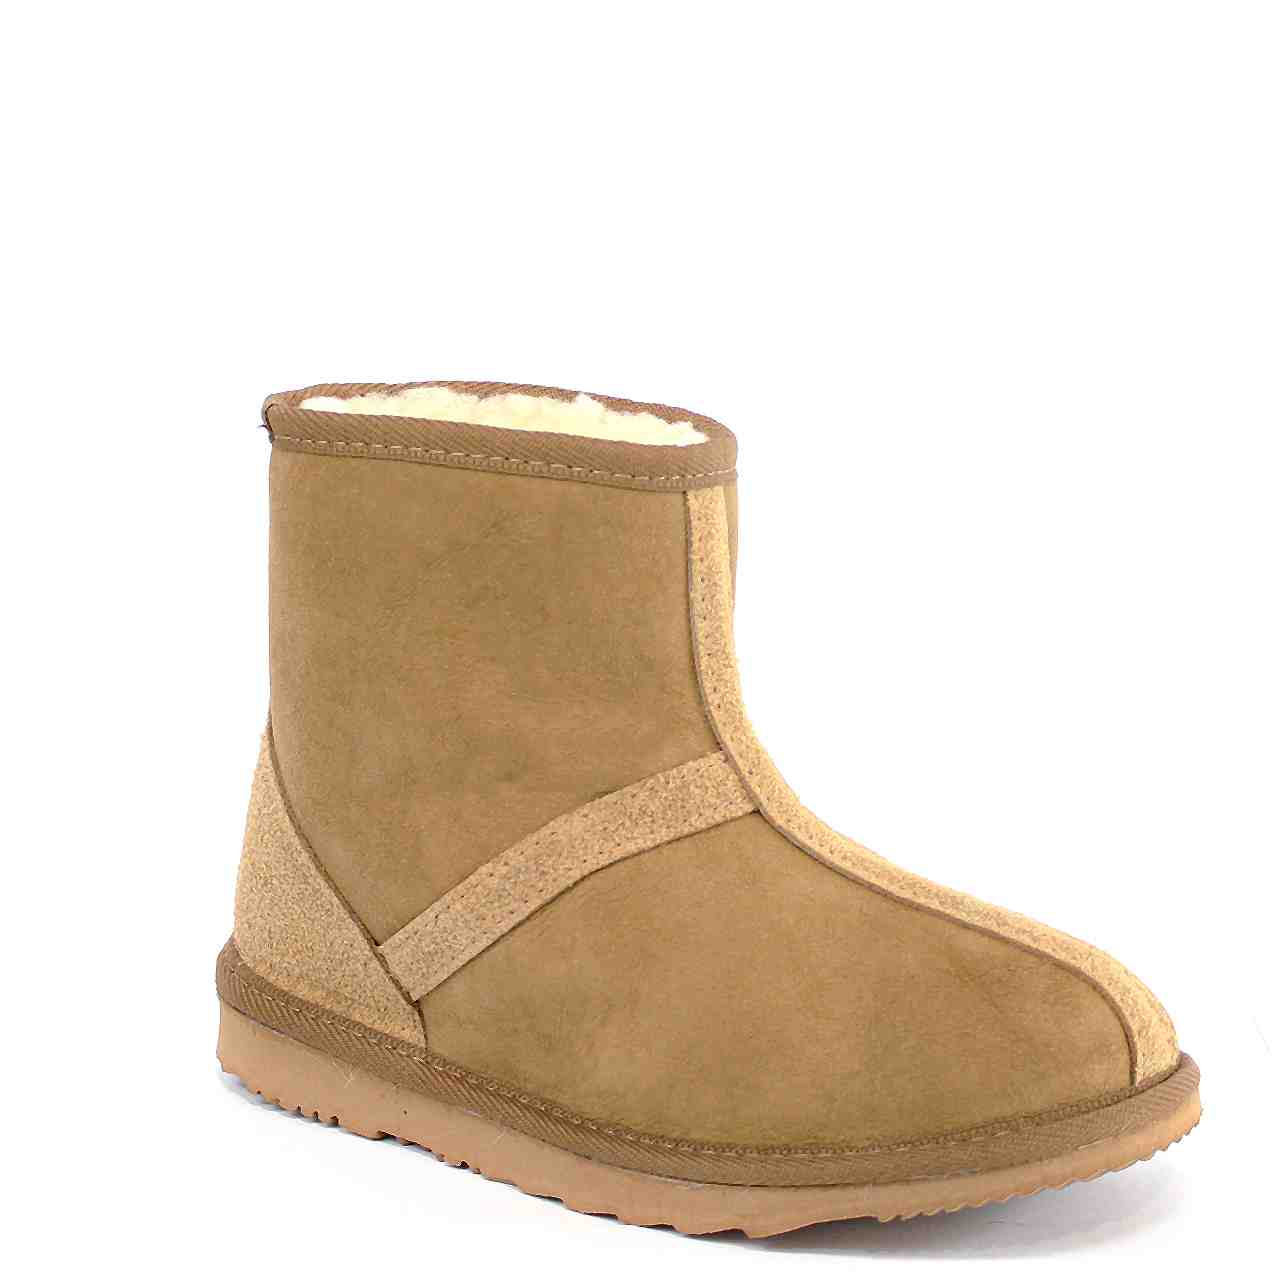 Eildon Boots Made by Ugg Australia